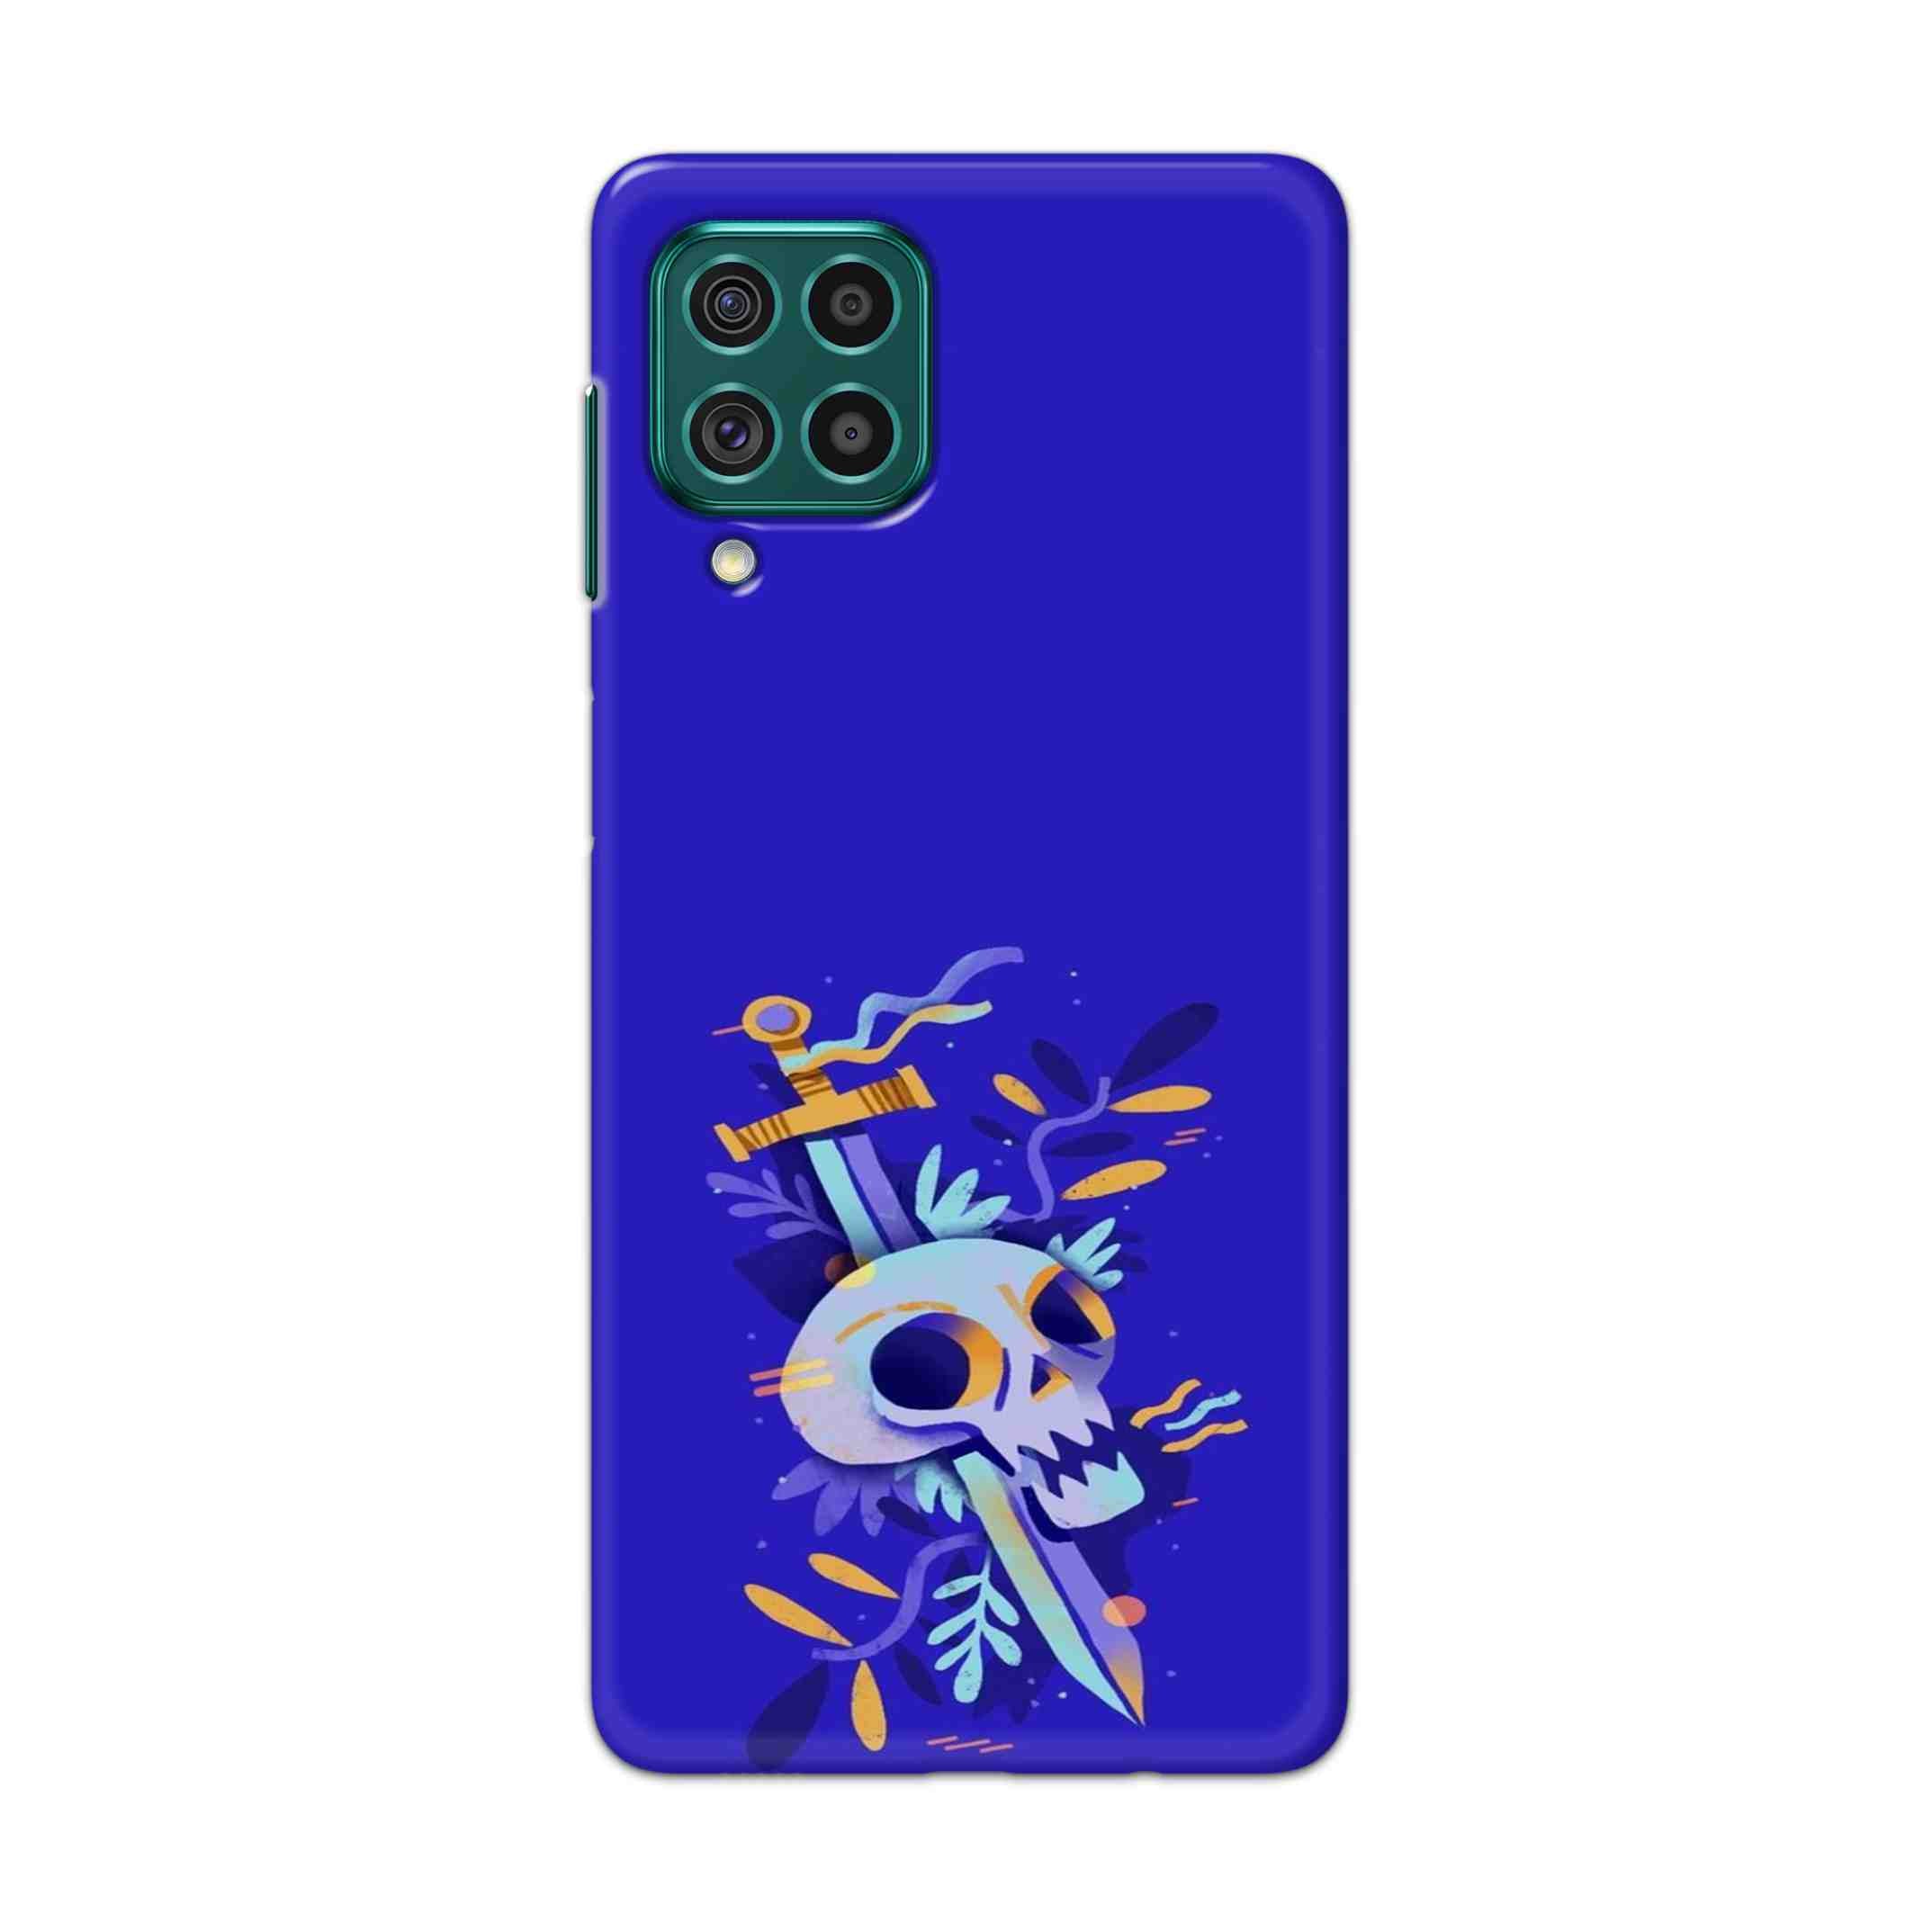 Buy Blue Skull Hard Back Mobile Phone Case Cover For Galaxy F62 Online